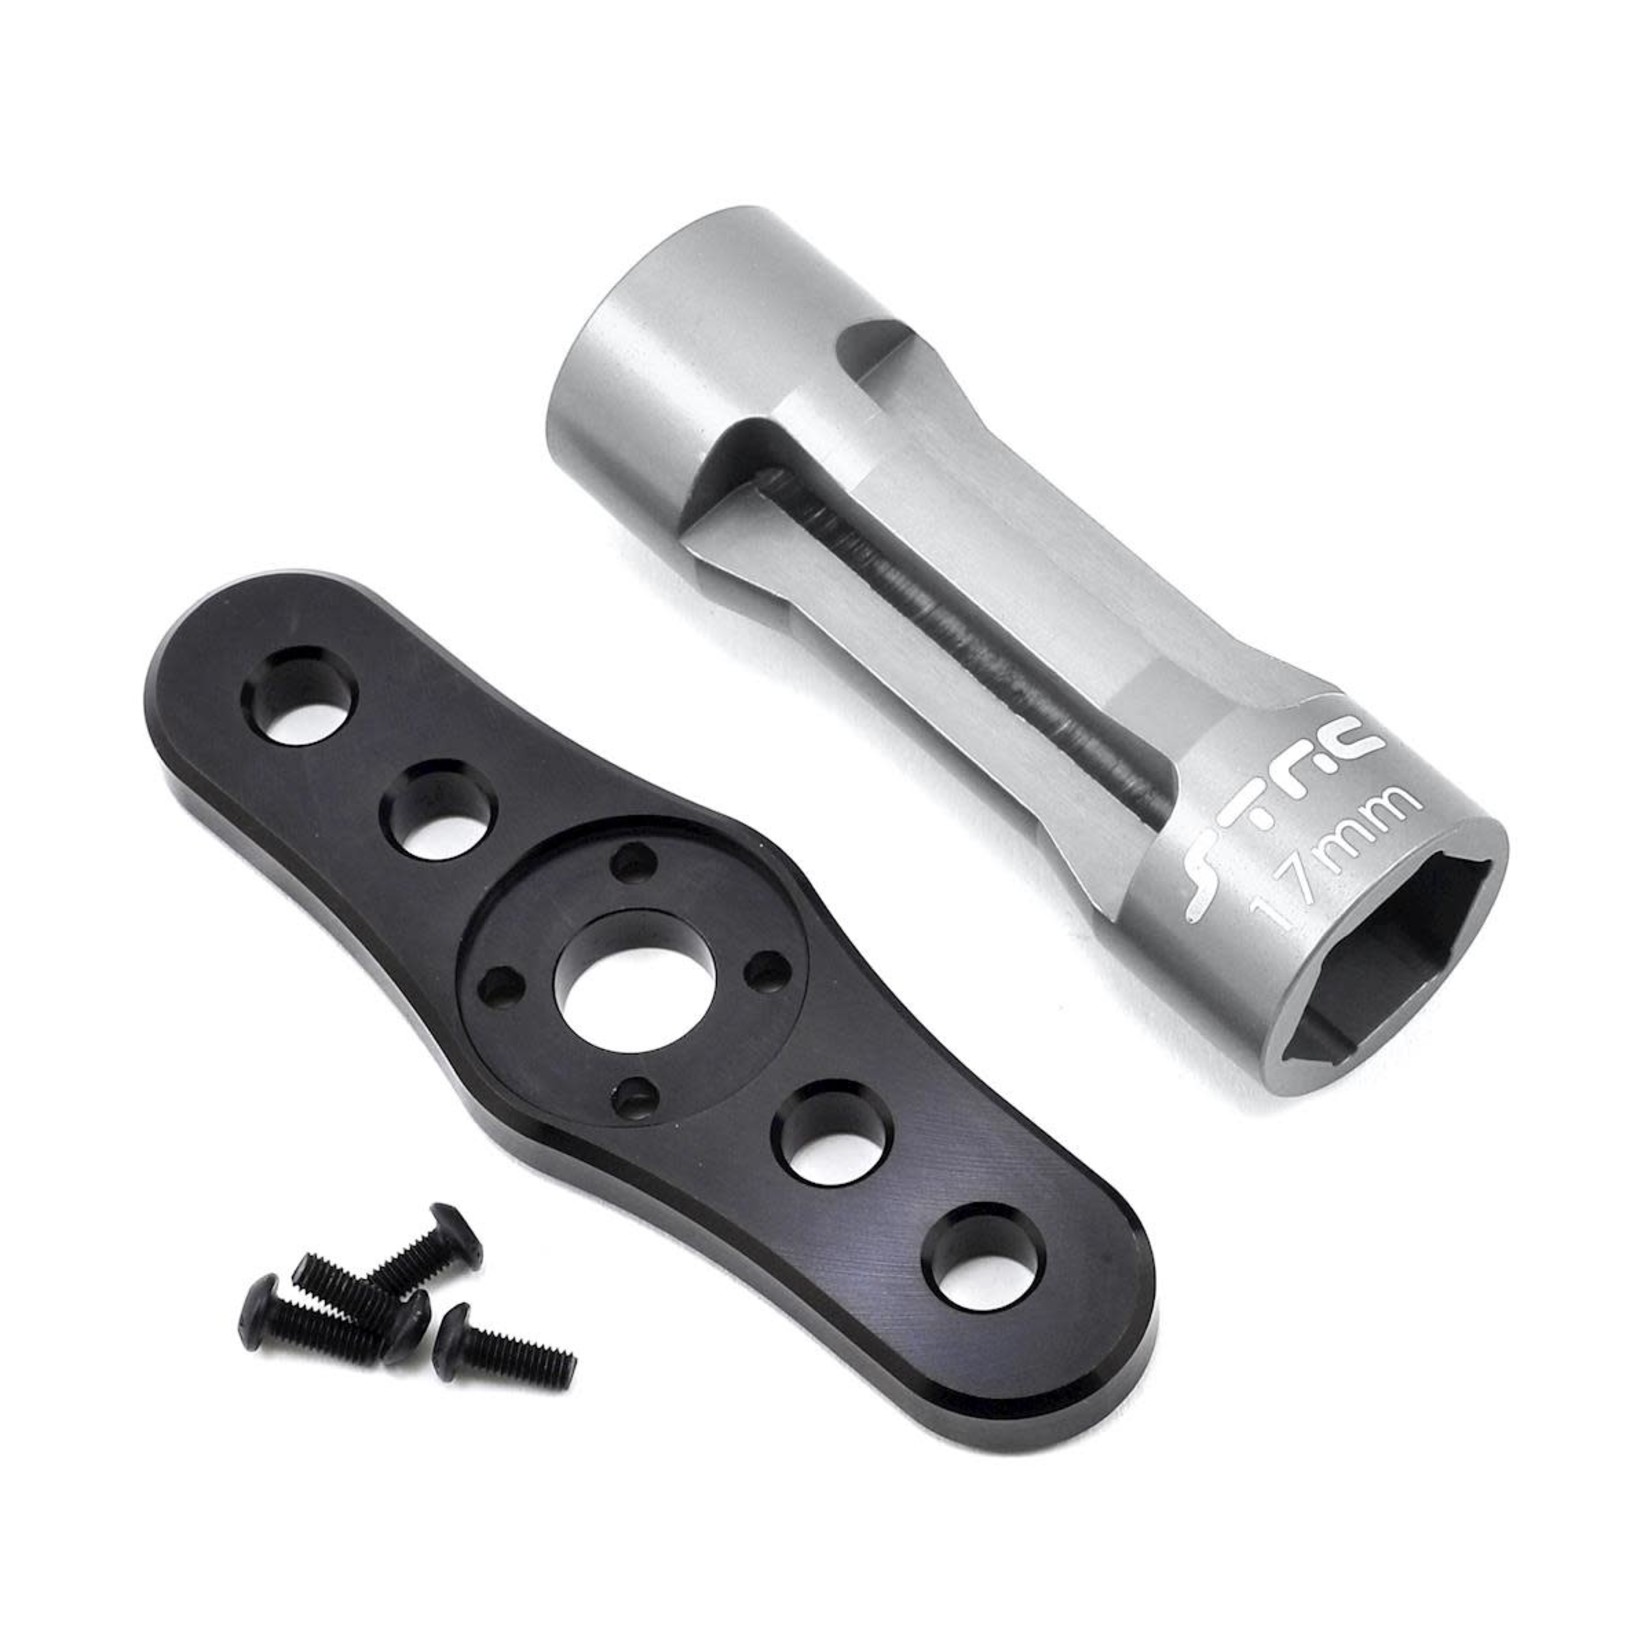 ST Racing Concepts ST Racing Concepts 17mm Light Weight T-Handle Wheel Wrench (Black/Silver) #STRA17BKS